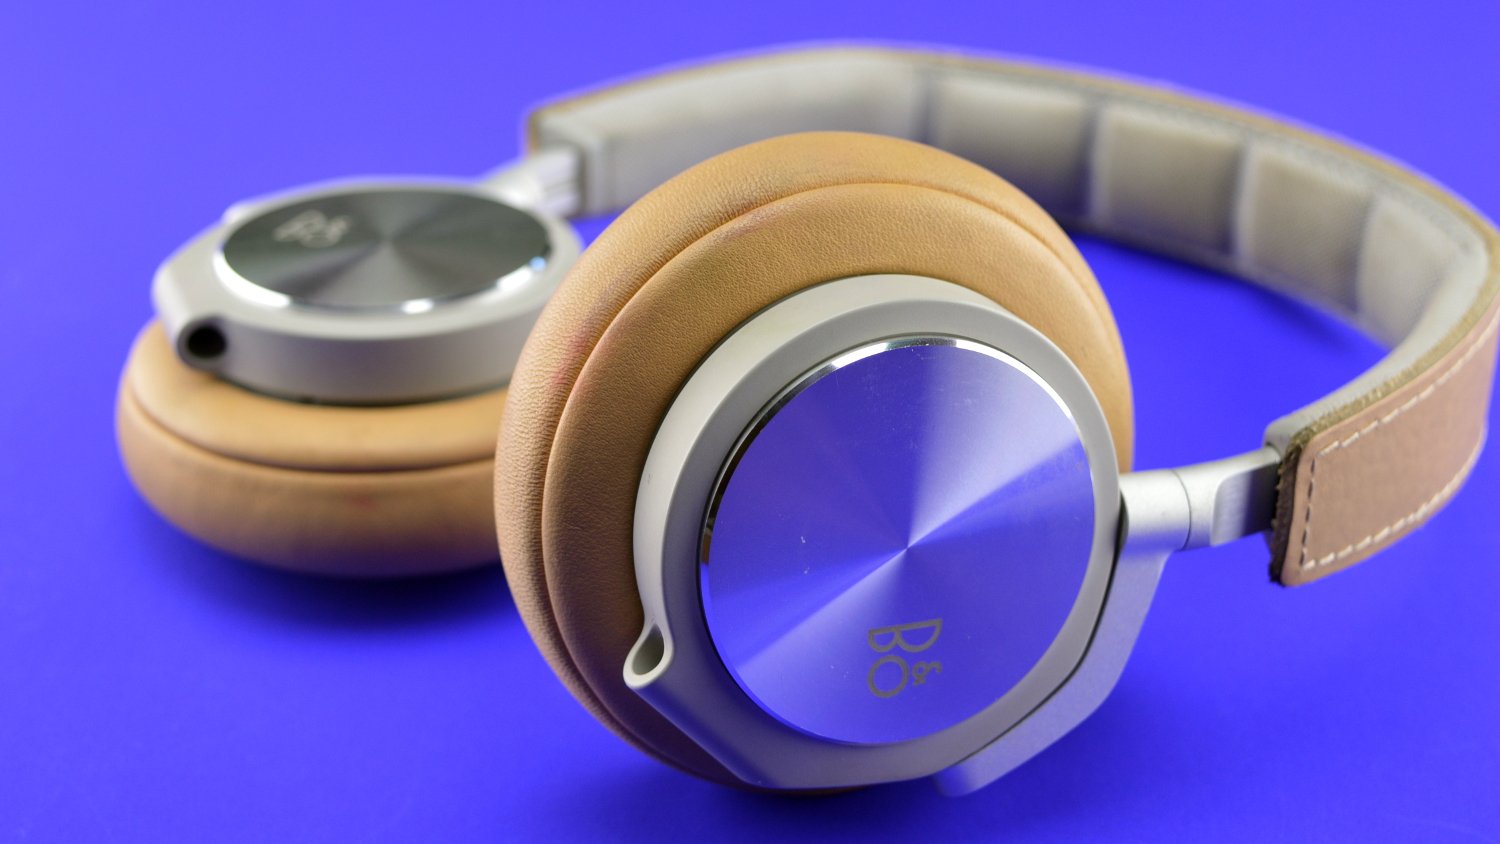 B&O Beoplay H6 Over-Ear Headphones Review - Headphone Review